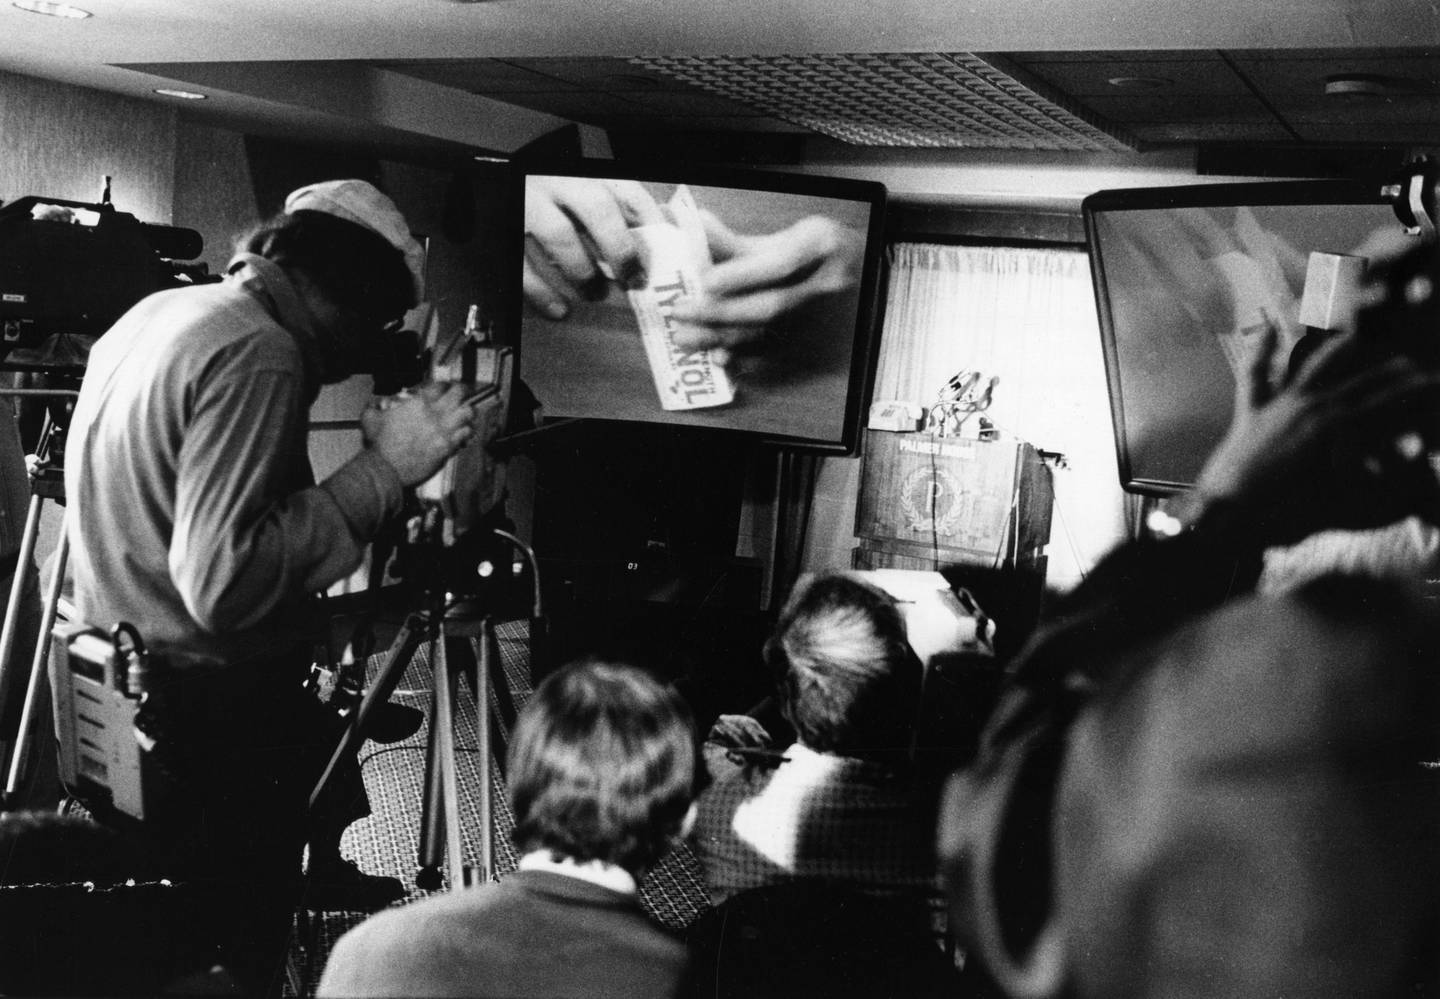 Johnson & Johnson held a nationwide news conference via satellite on Nov. 11, 1982, to announce Tylenol’s new tamper-resistant packaging. Journalists watched in Chicago at the Palmer House hotel.